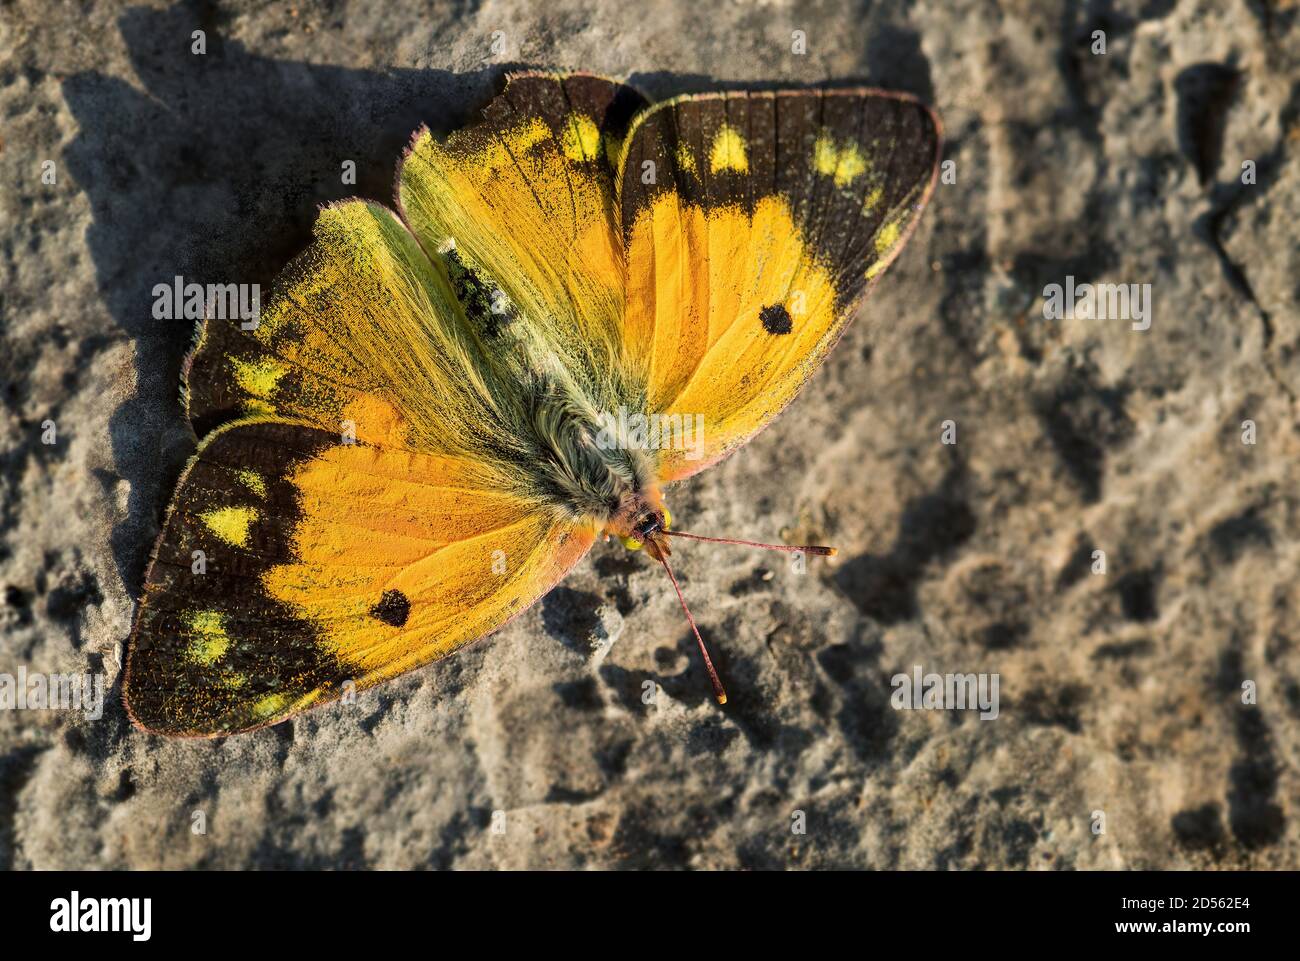 Clouded Yellow butterfly - Colias croceus, beautifull yellow butterfly from European meadows and grasslands, Pag island, Croatia. Stock Photo